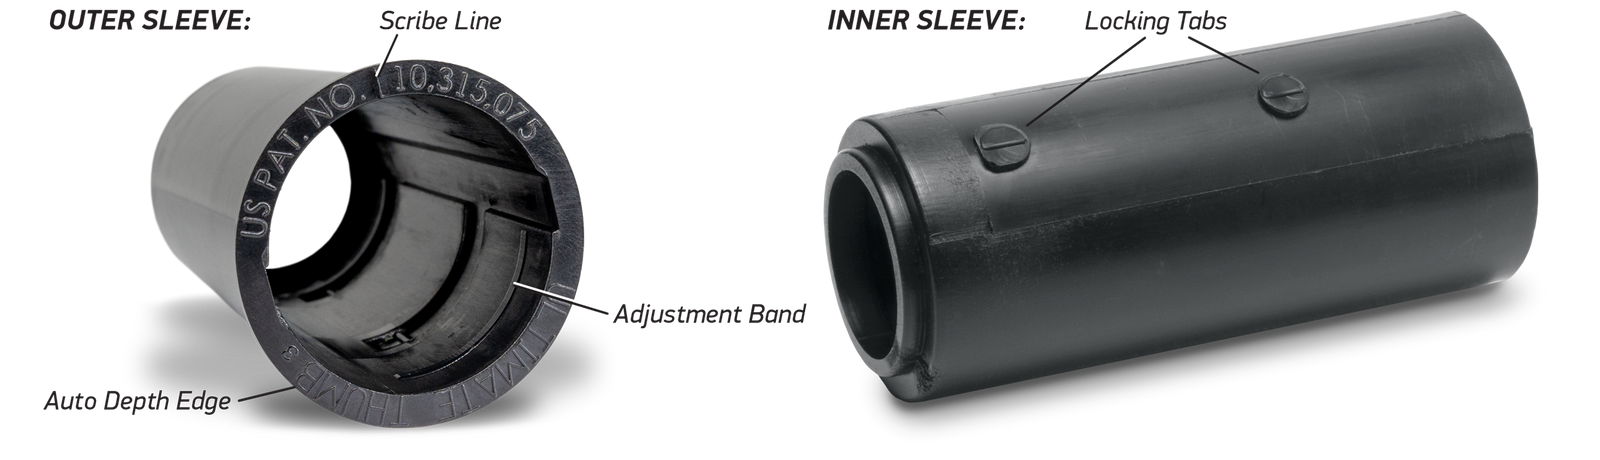 Visual representation of Outer and Inner Interchangeable Thumb sleeves with callouts for specific features.